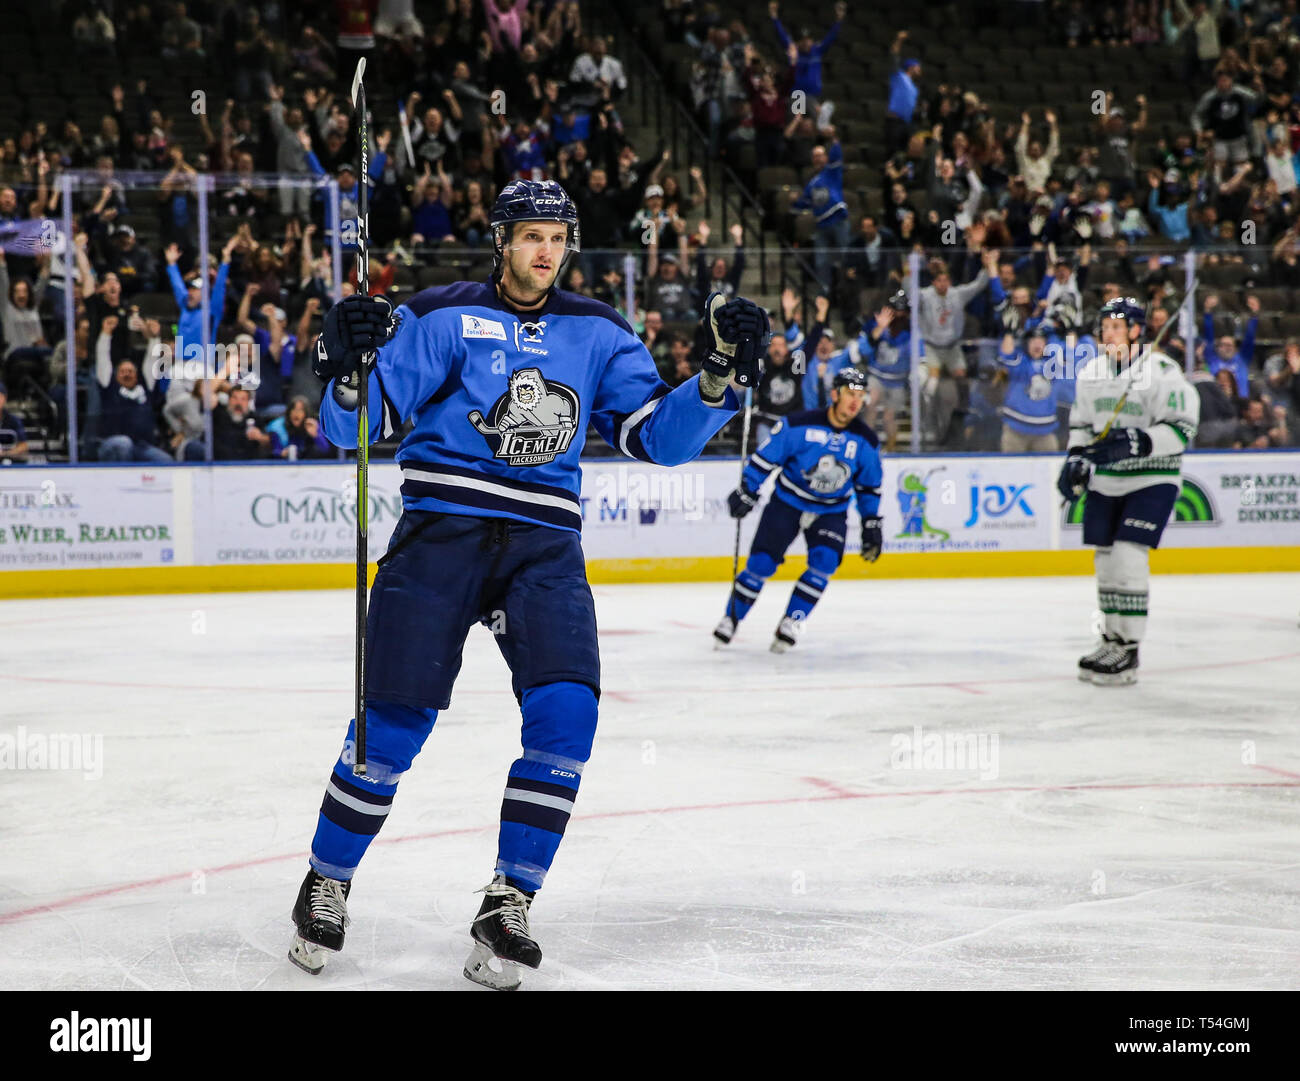 Jacksonville, USA. 19th Apr, 2019. Jacksonville Icemen forward Cam Maclise (8) celebrates Fortier's goal during the first period of an ECHL professional hockey playoff game against the Florida Everblades at Veterans Memorial Arena in Jacksonville, Fla., Friday, April 19, 2019. (Gary Lloyd McCullough/Cal Sport Media) Credit: Cal Sport Media/Alamy Live News Stock Photo